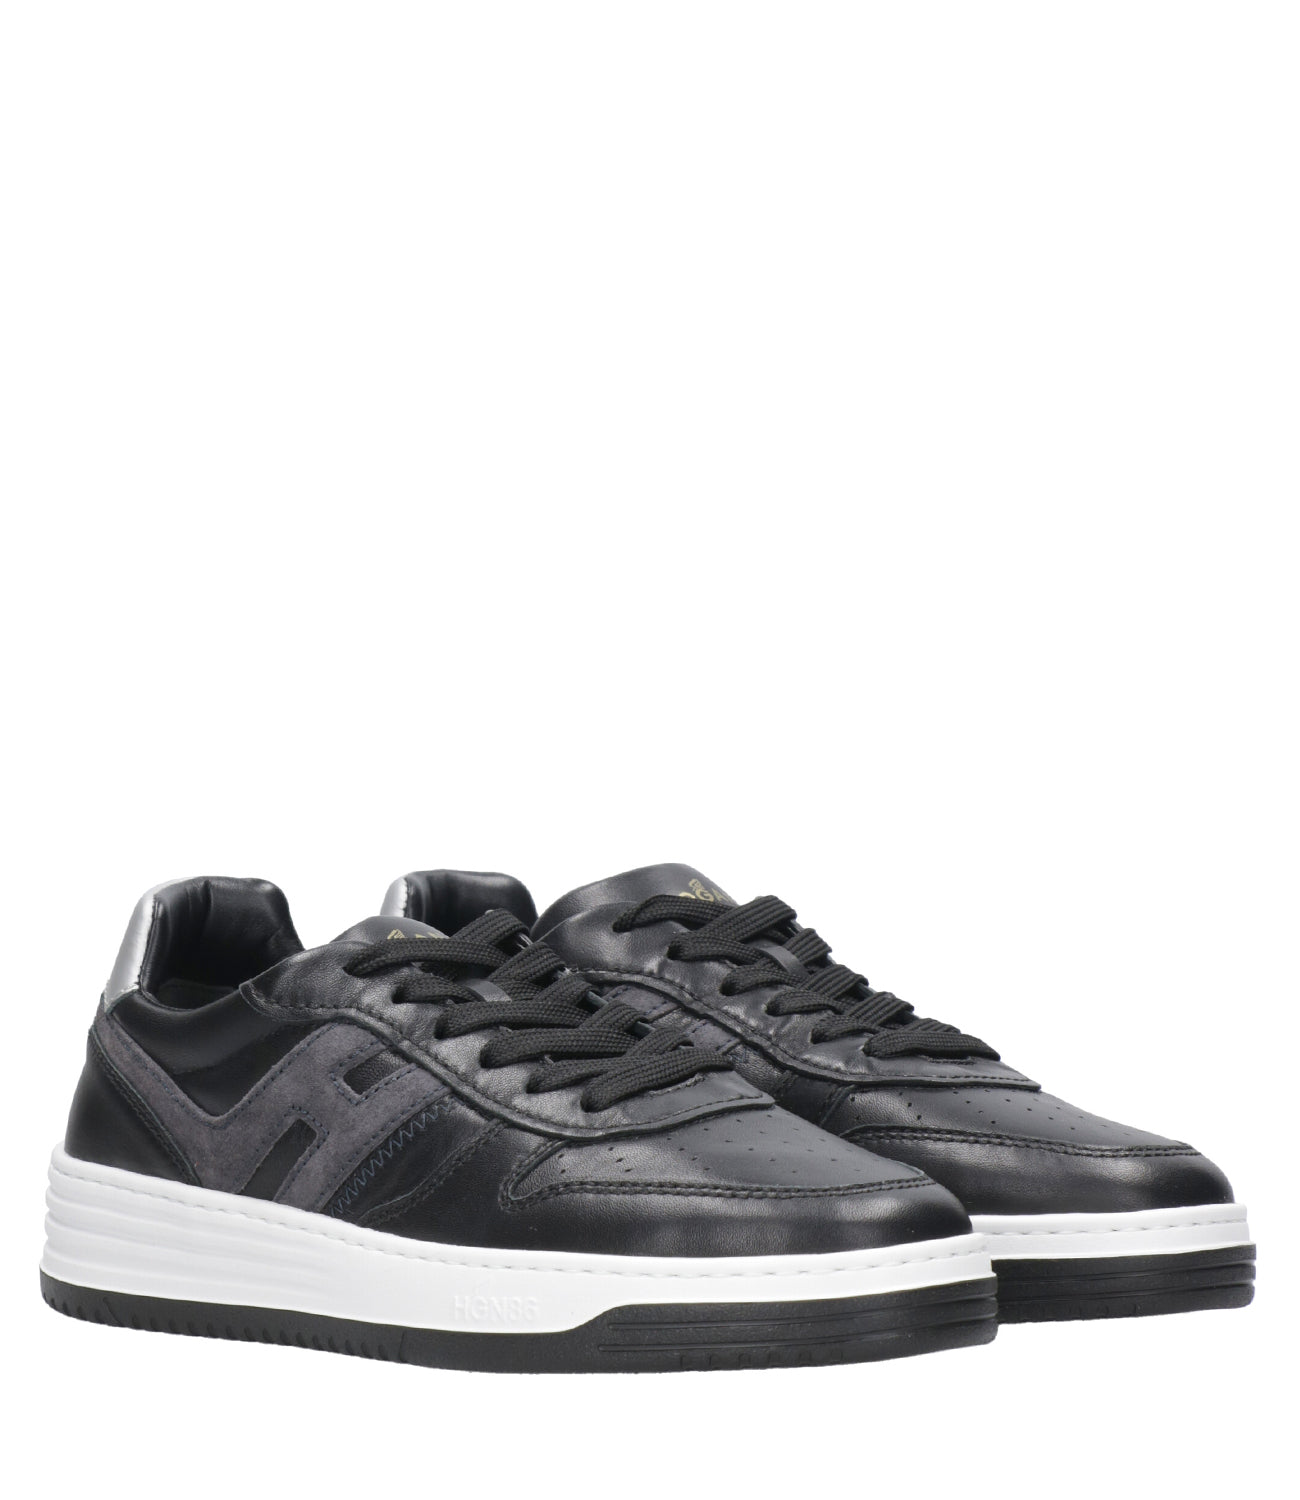 Hogan | Sneakers H580 Lace-up Black and White